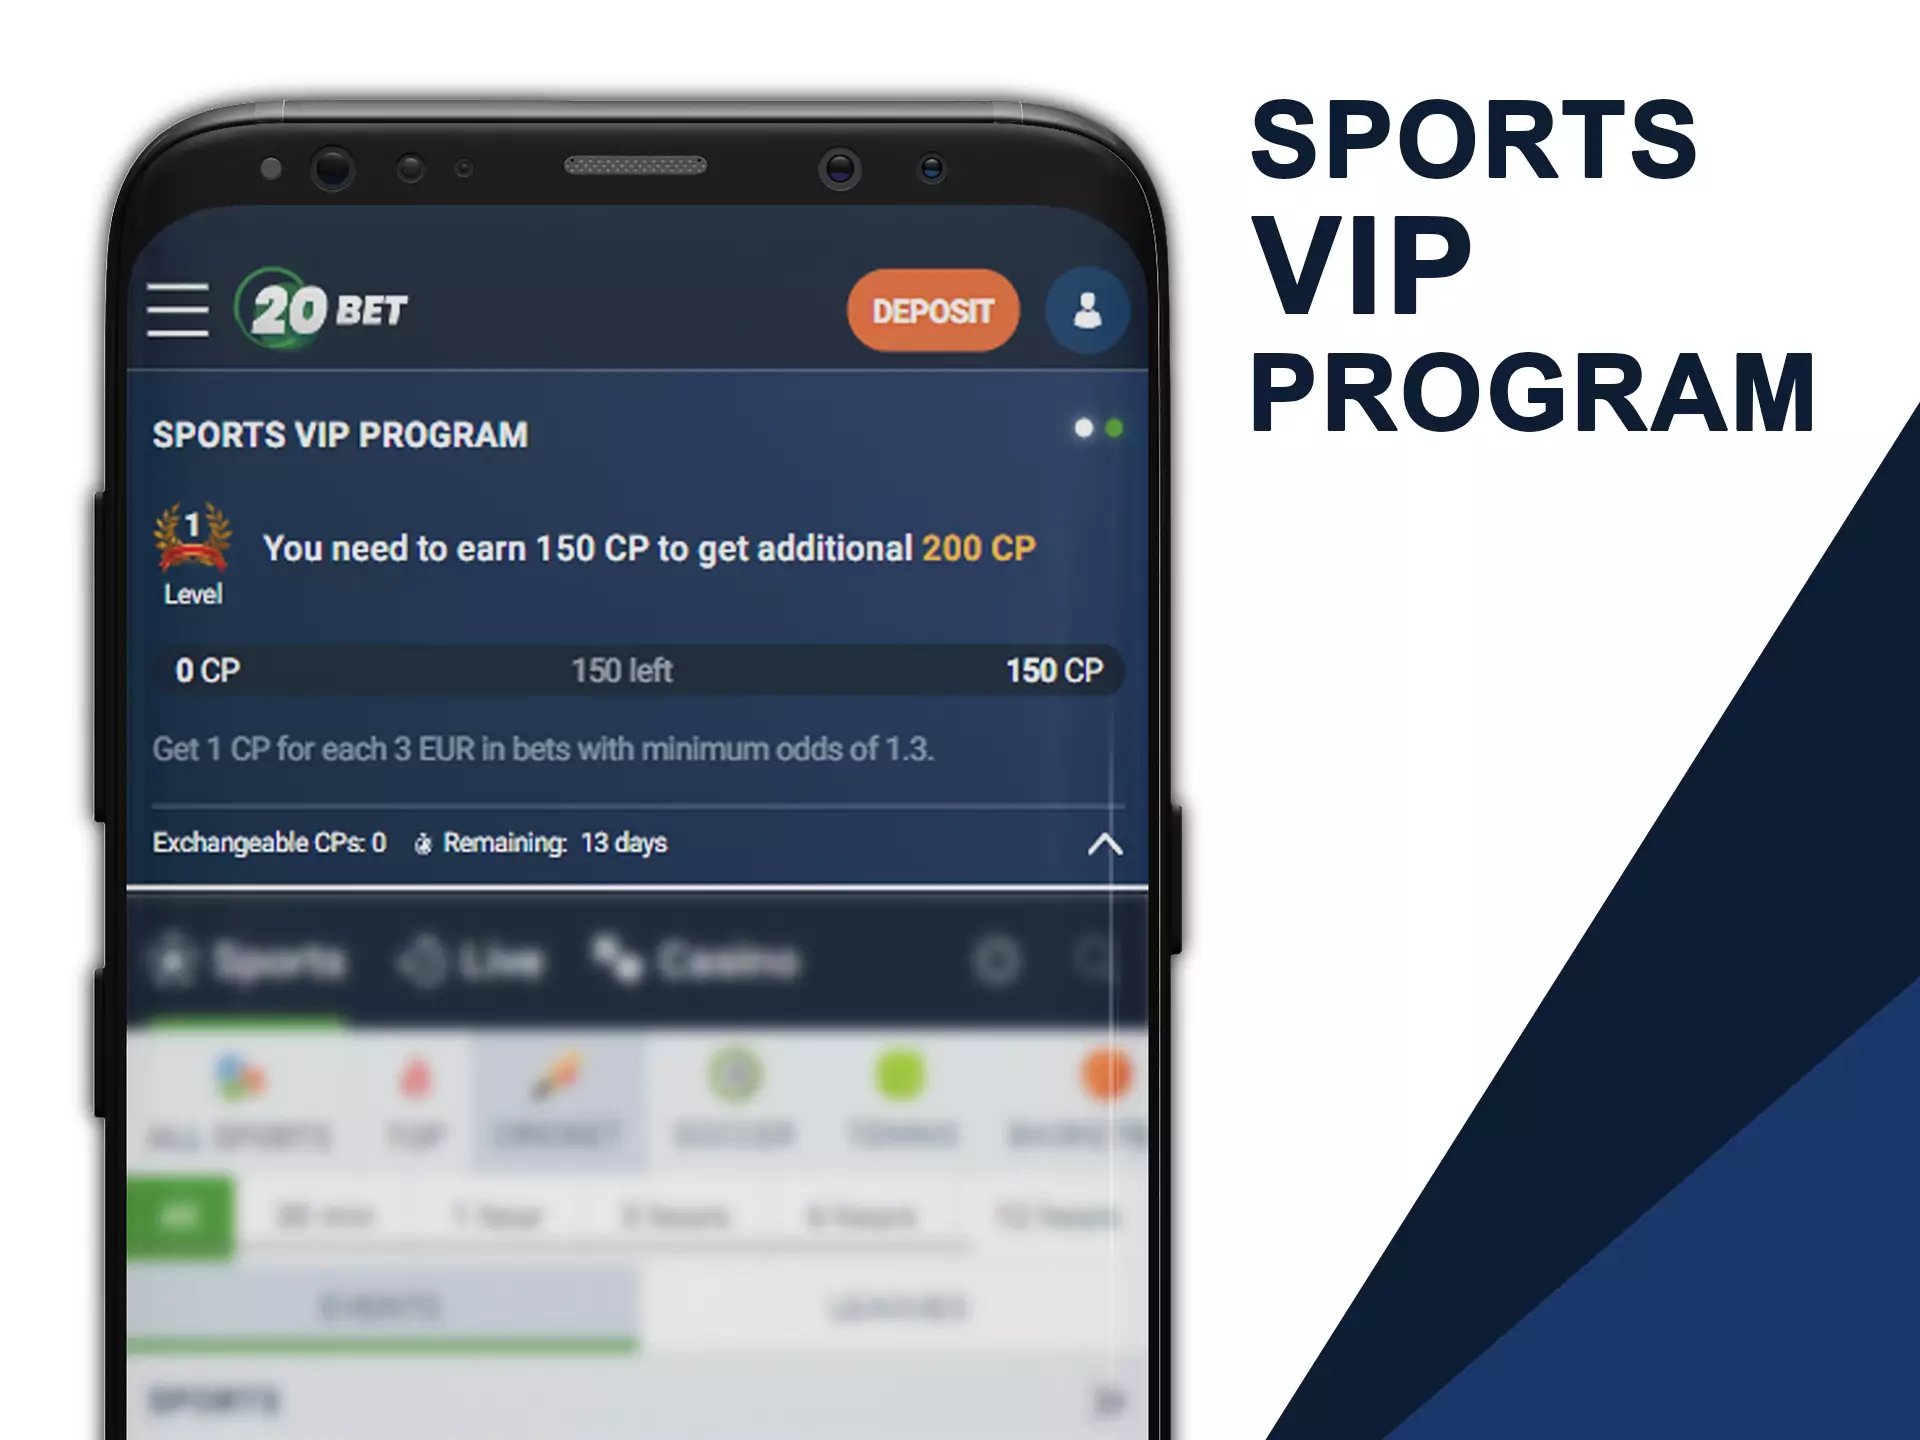 Increase your vip status at 20bet sports.